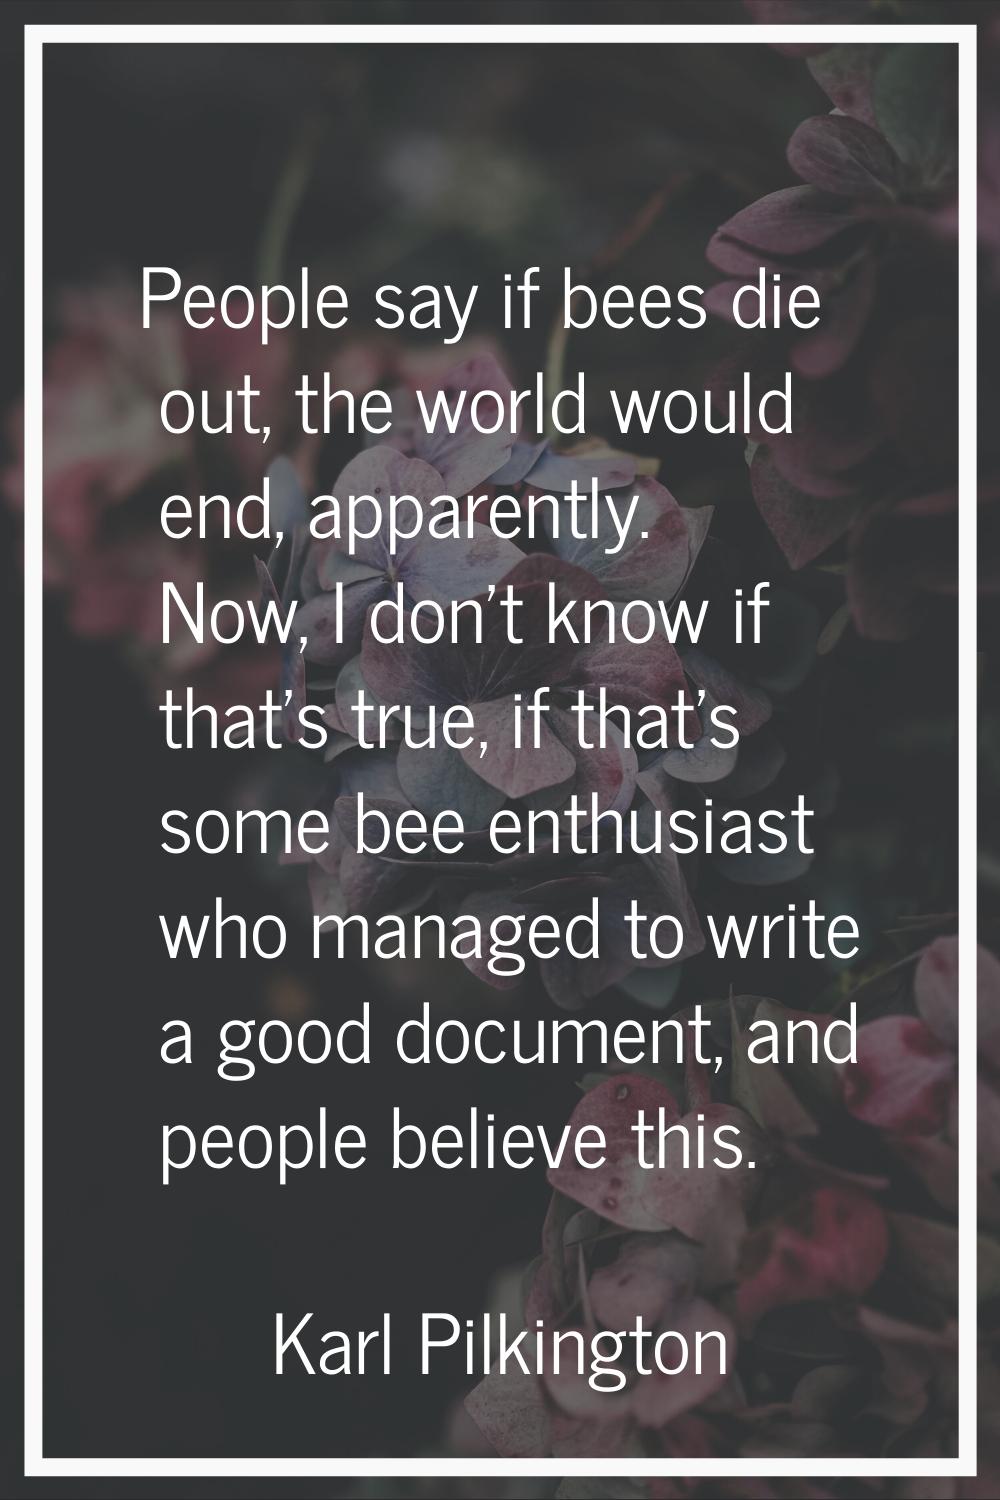 People say if bees die out, the world would end, apparently. Now, I don't know if that's true, if t